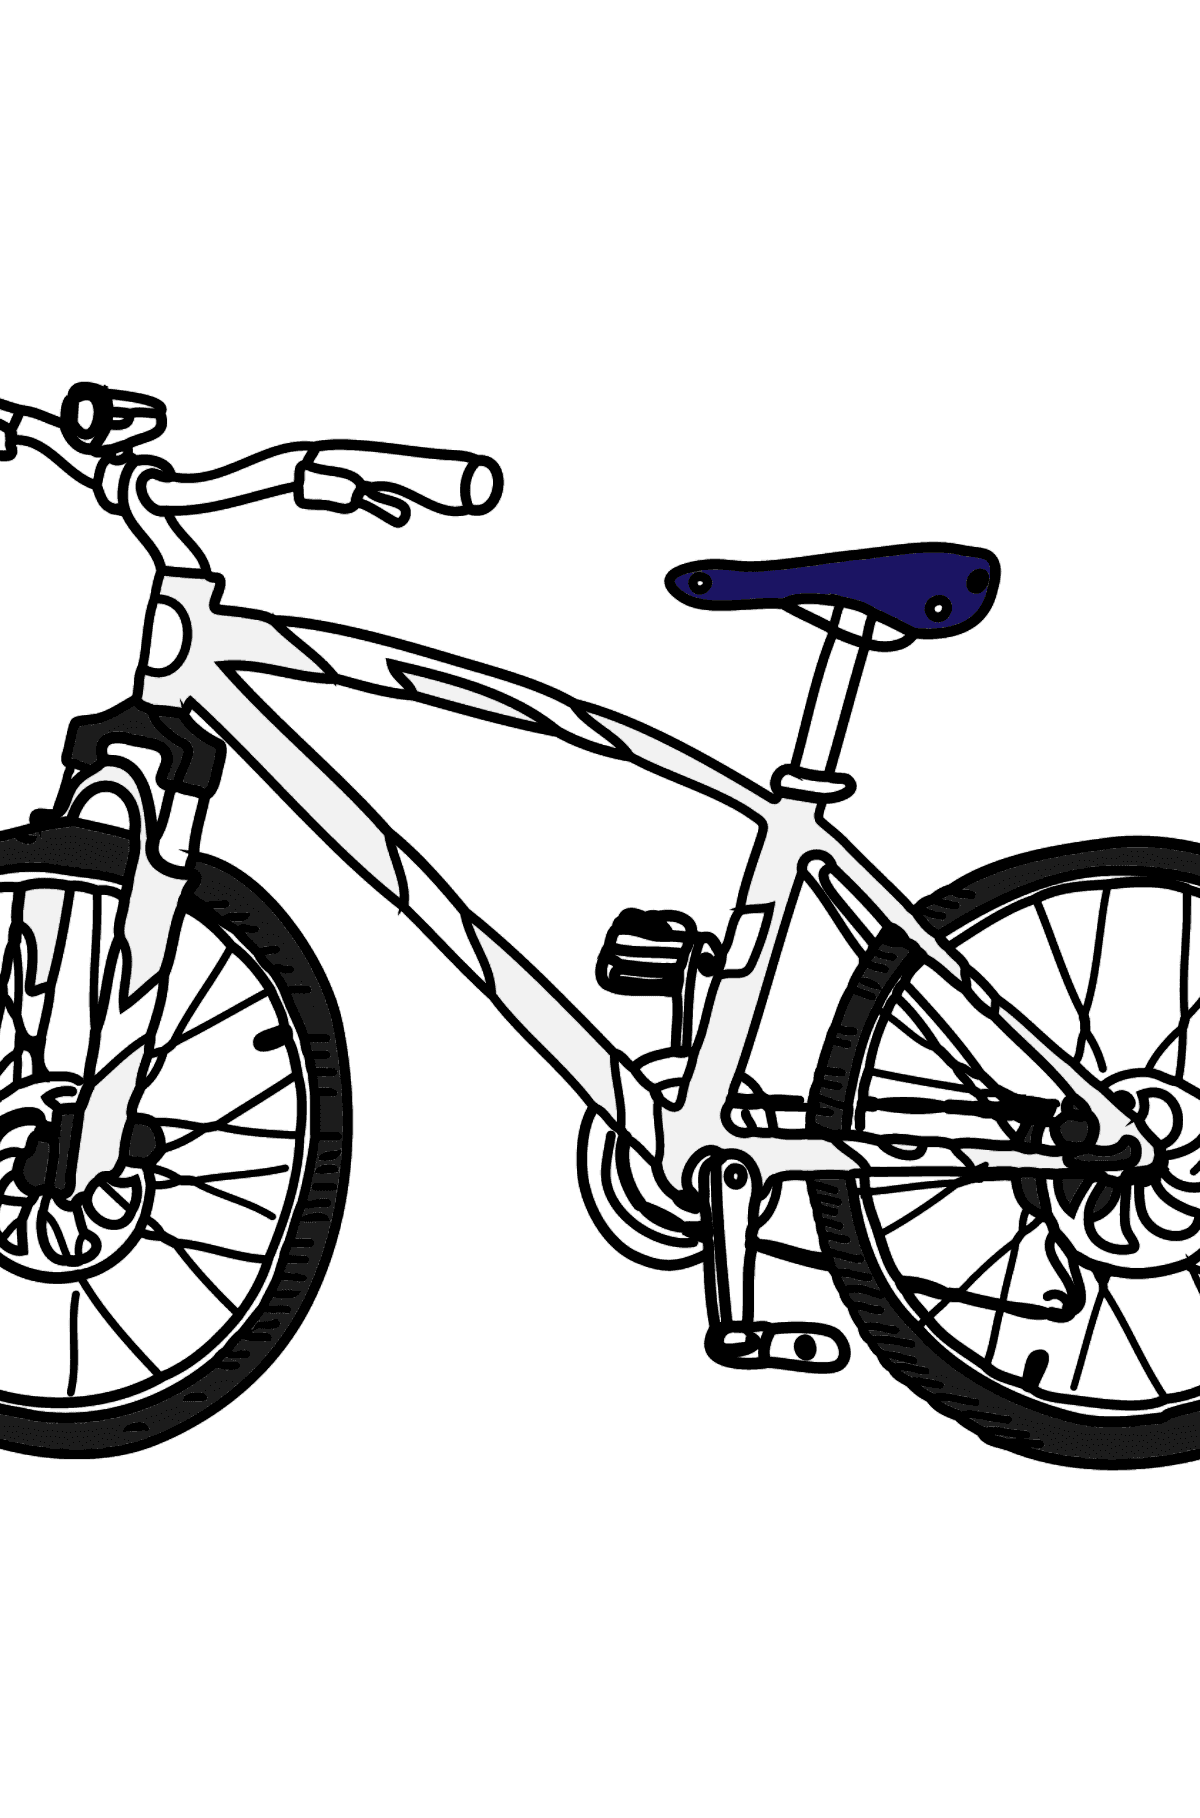 Coloring Page - A Sport Bike - Coloring Pages for Kids